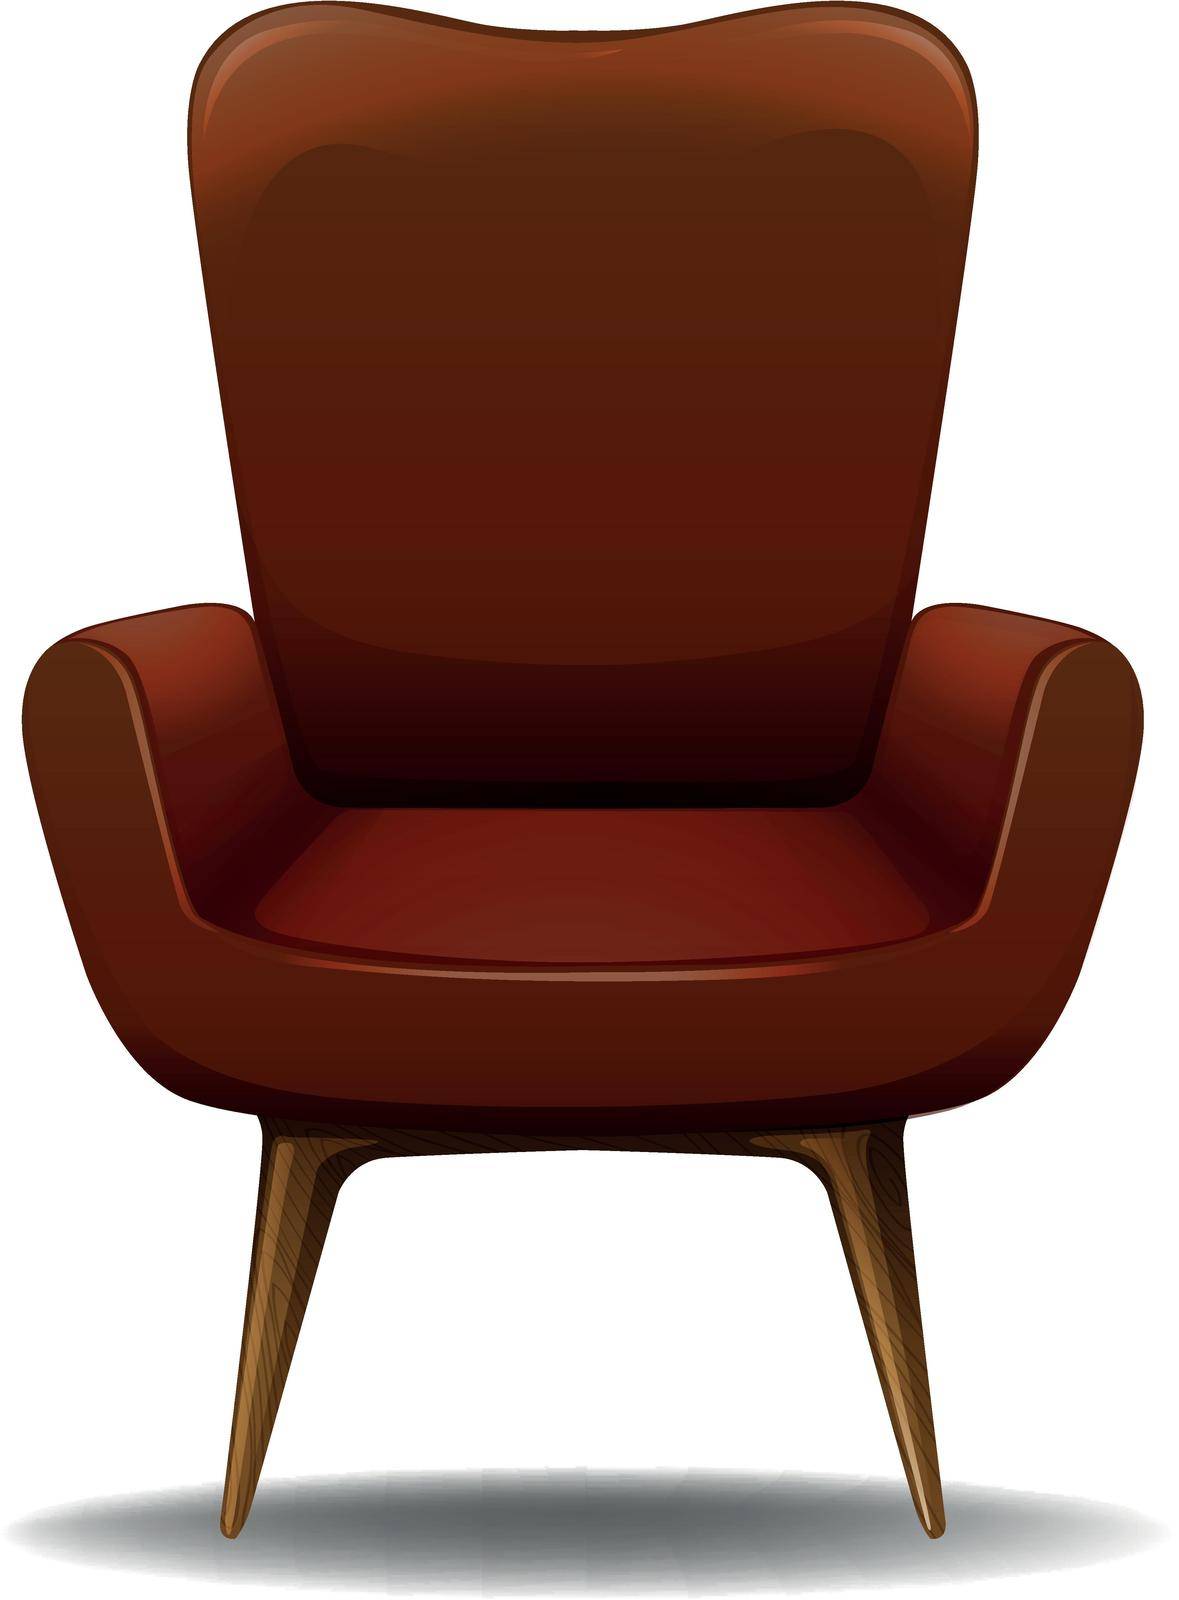 Close up luxury design of armchair with wooden legs